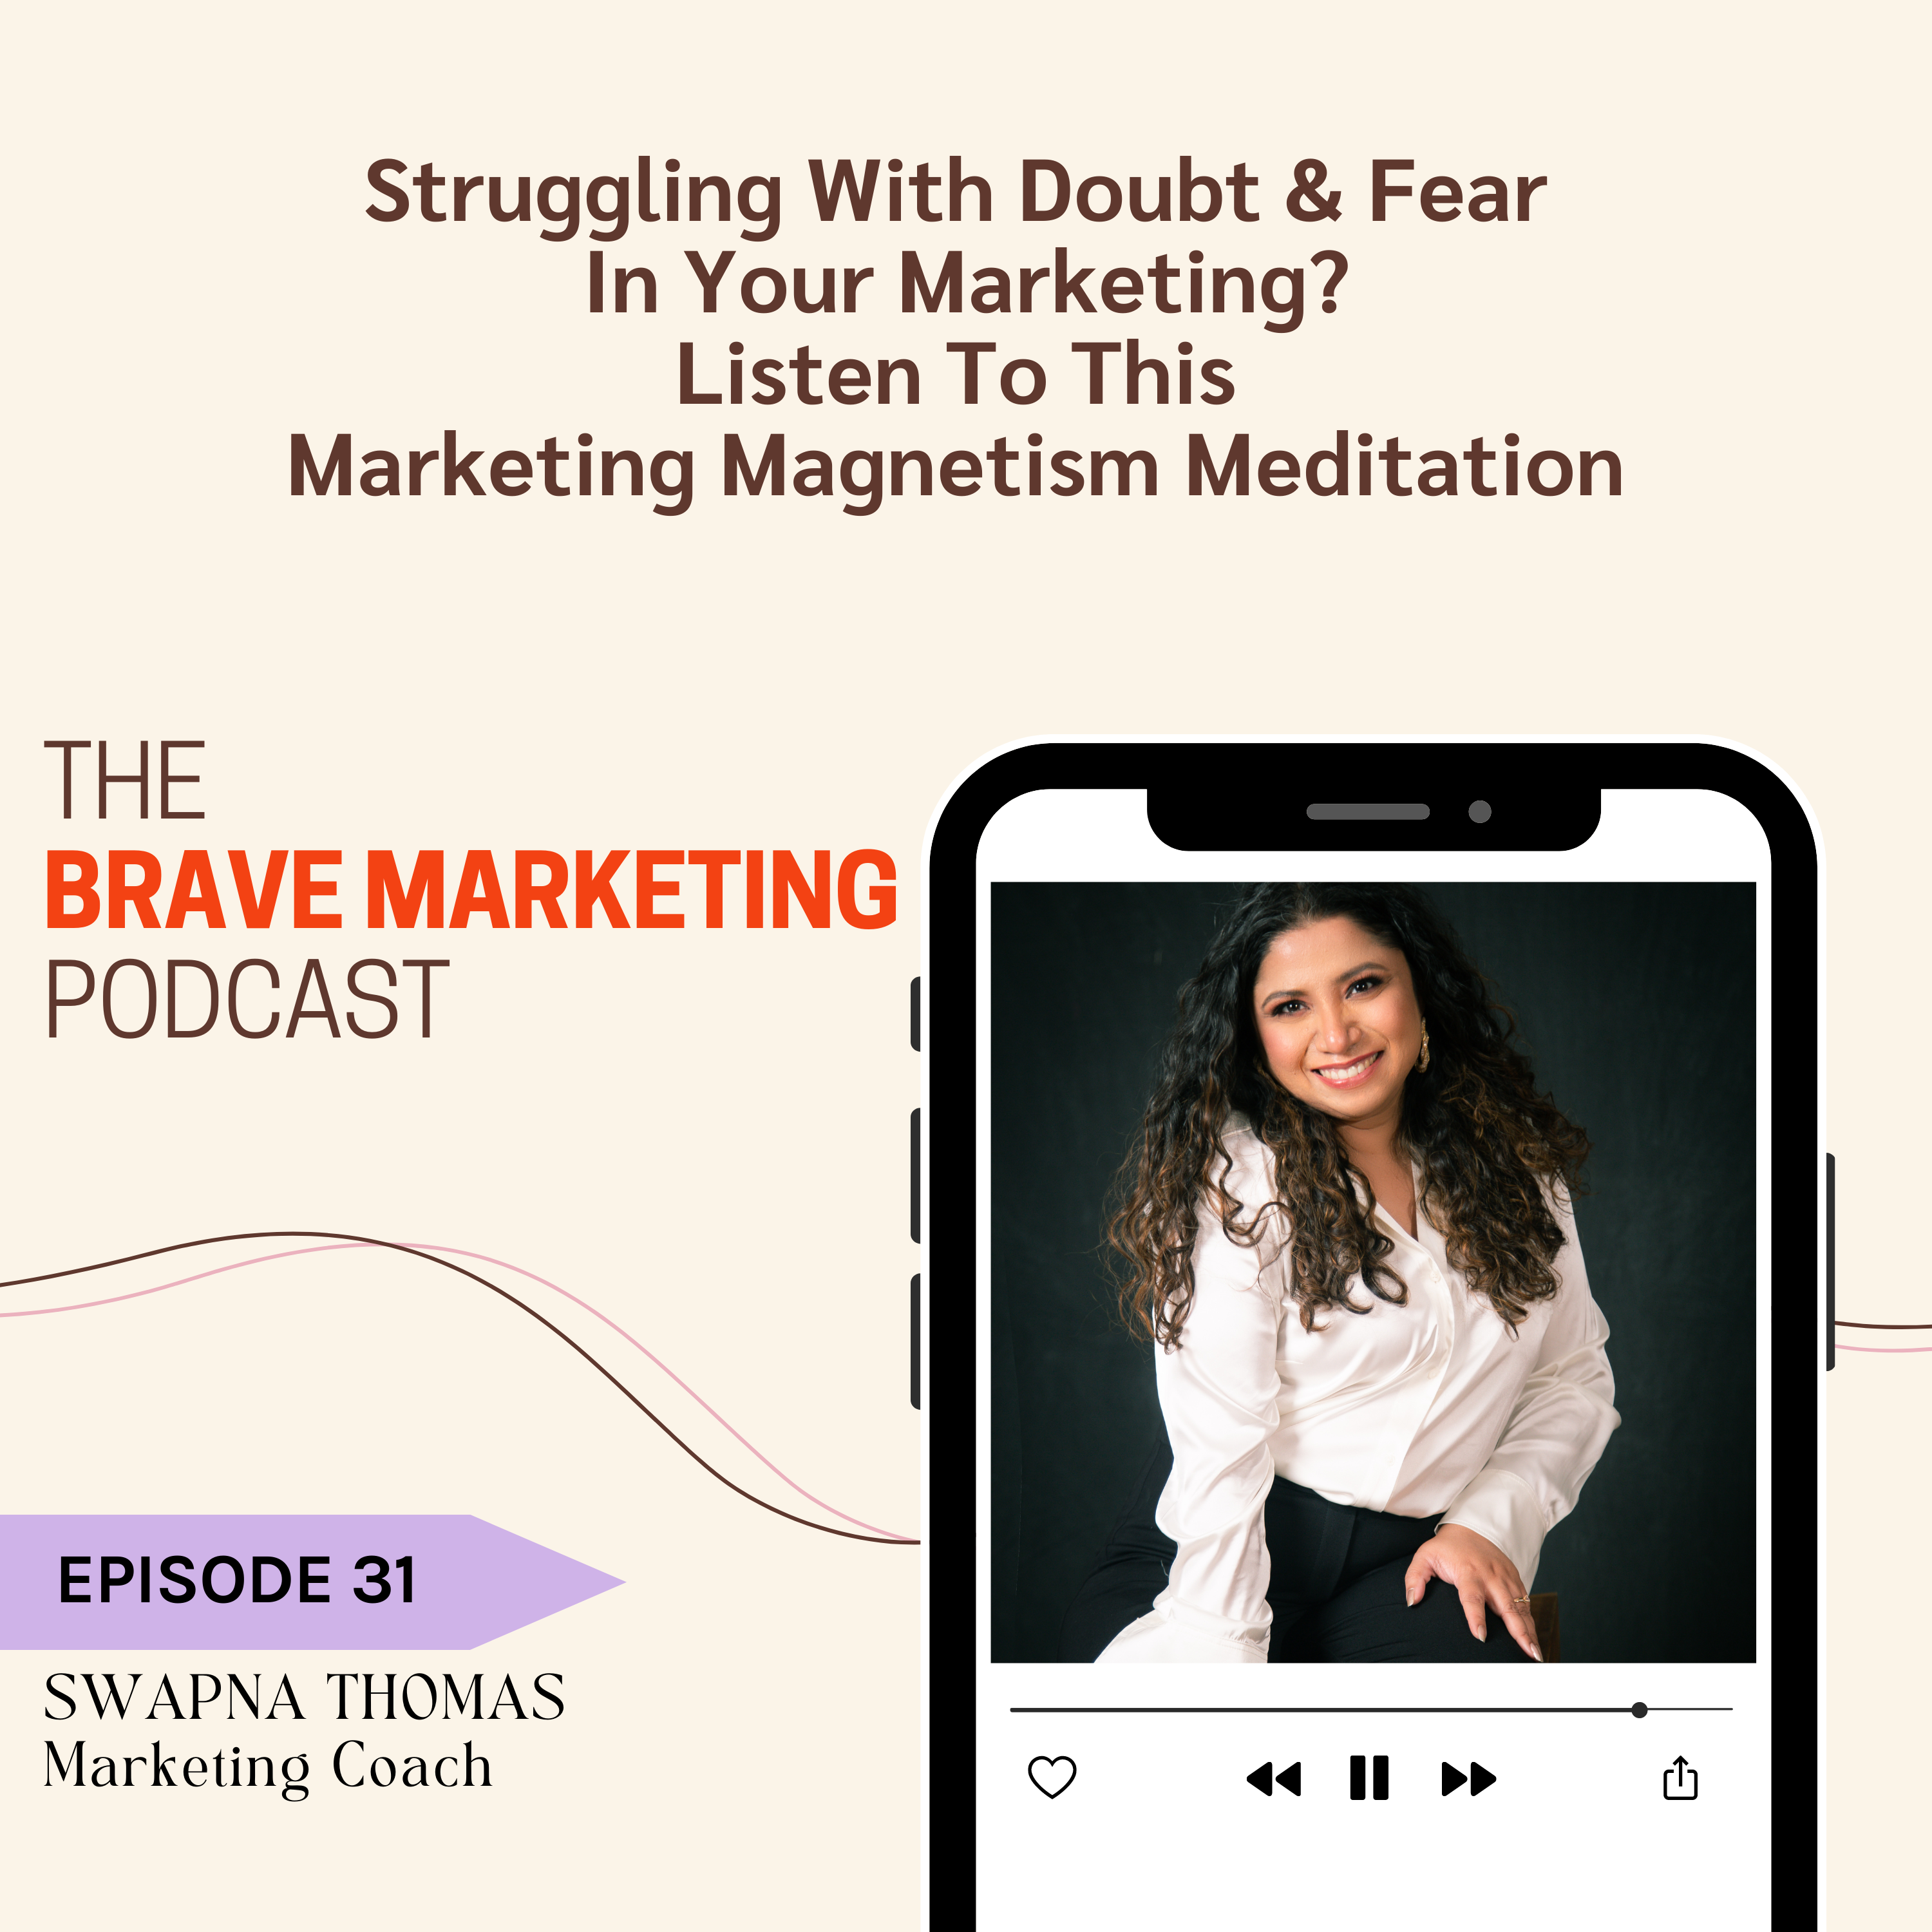 Struggling with doubt and fear in your marketing? Listen to this Marketing Magnetism Meditation